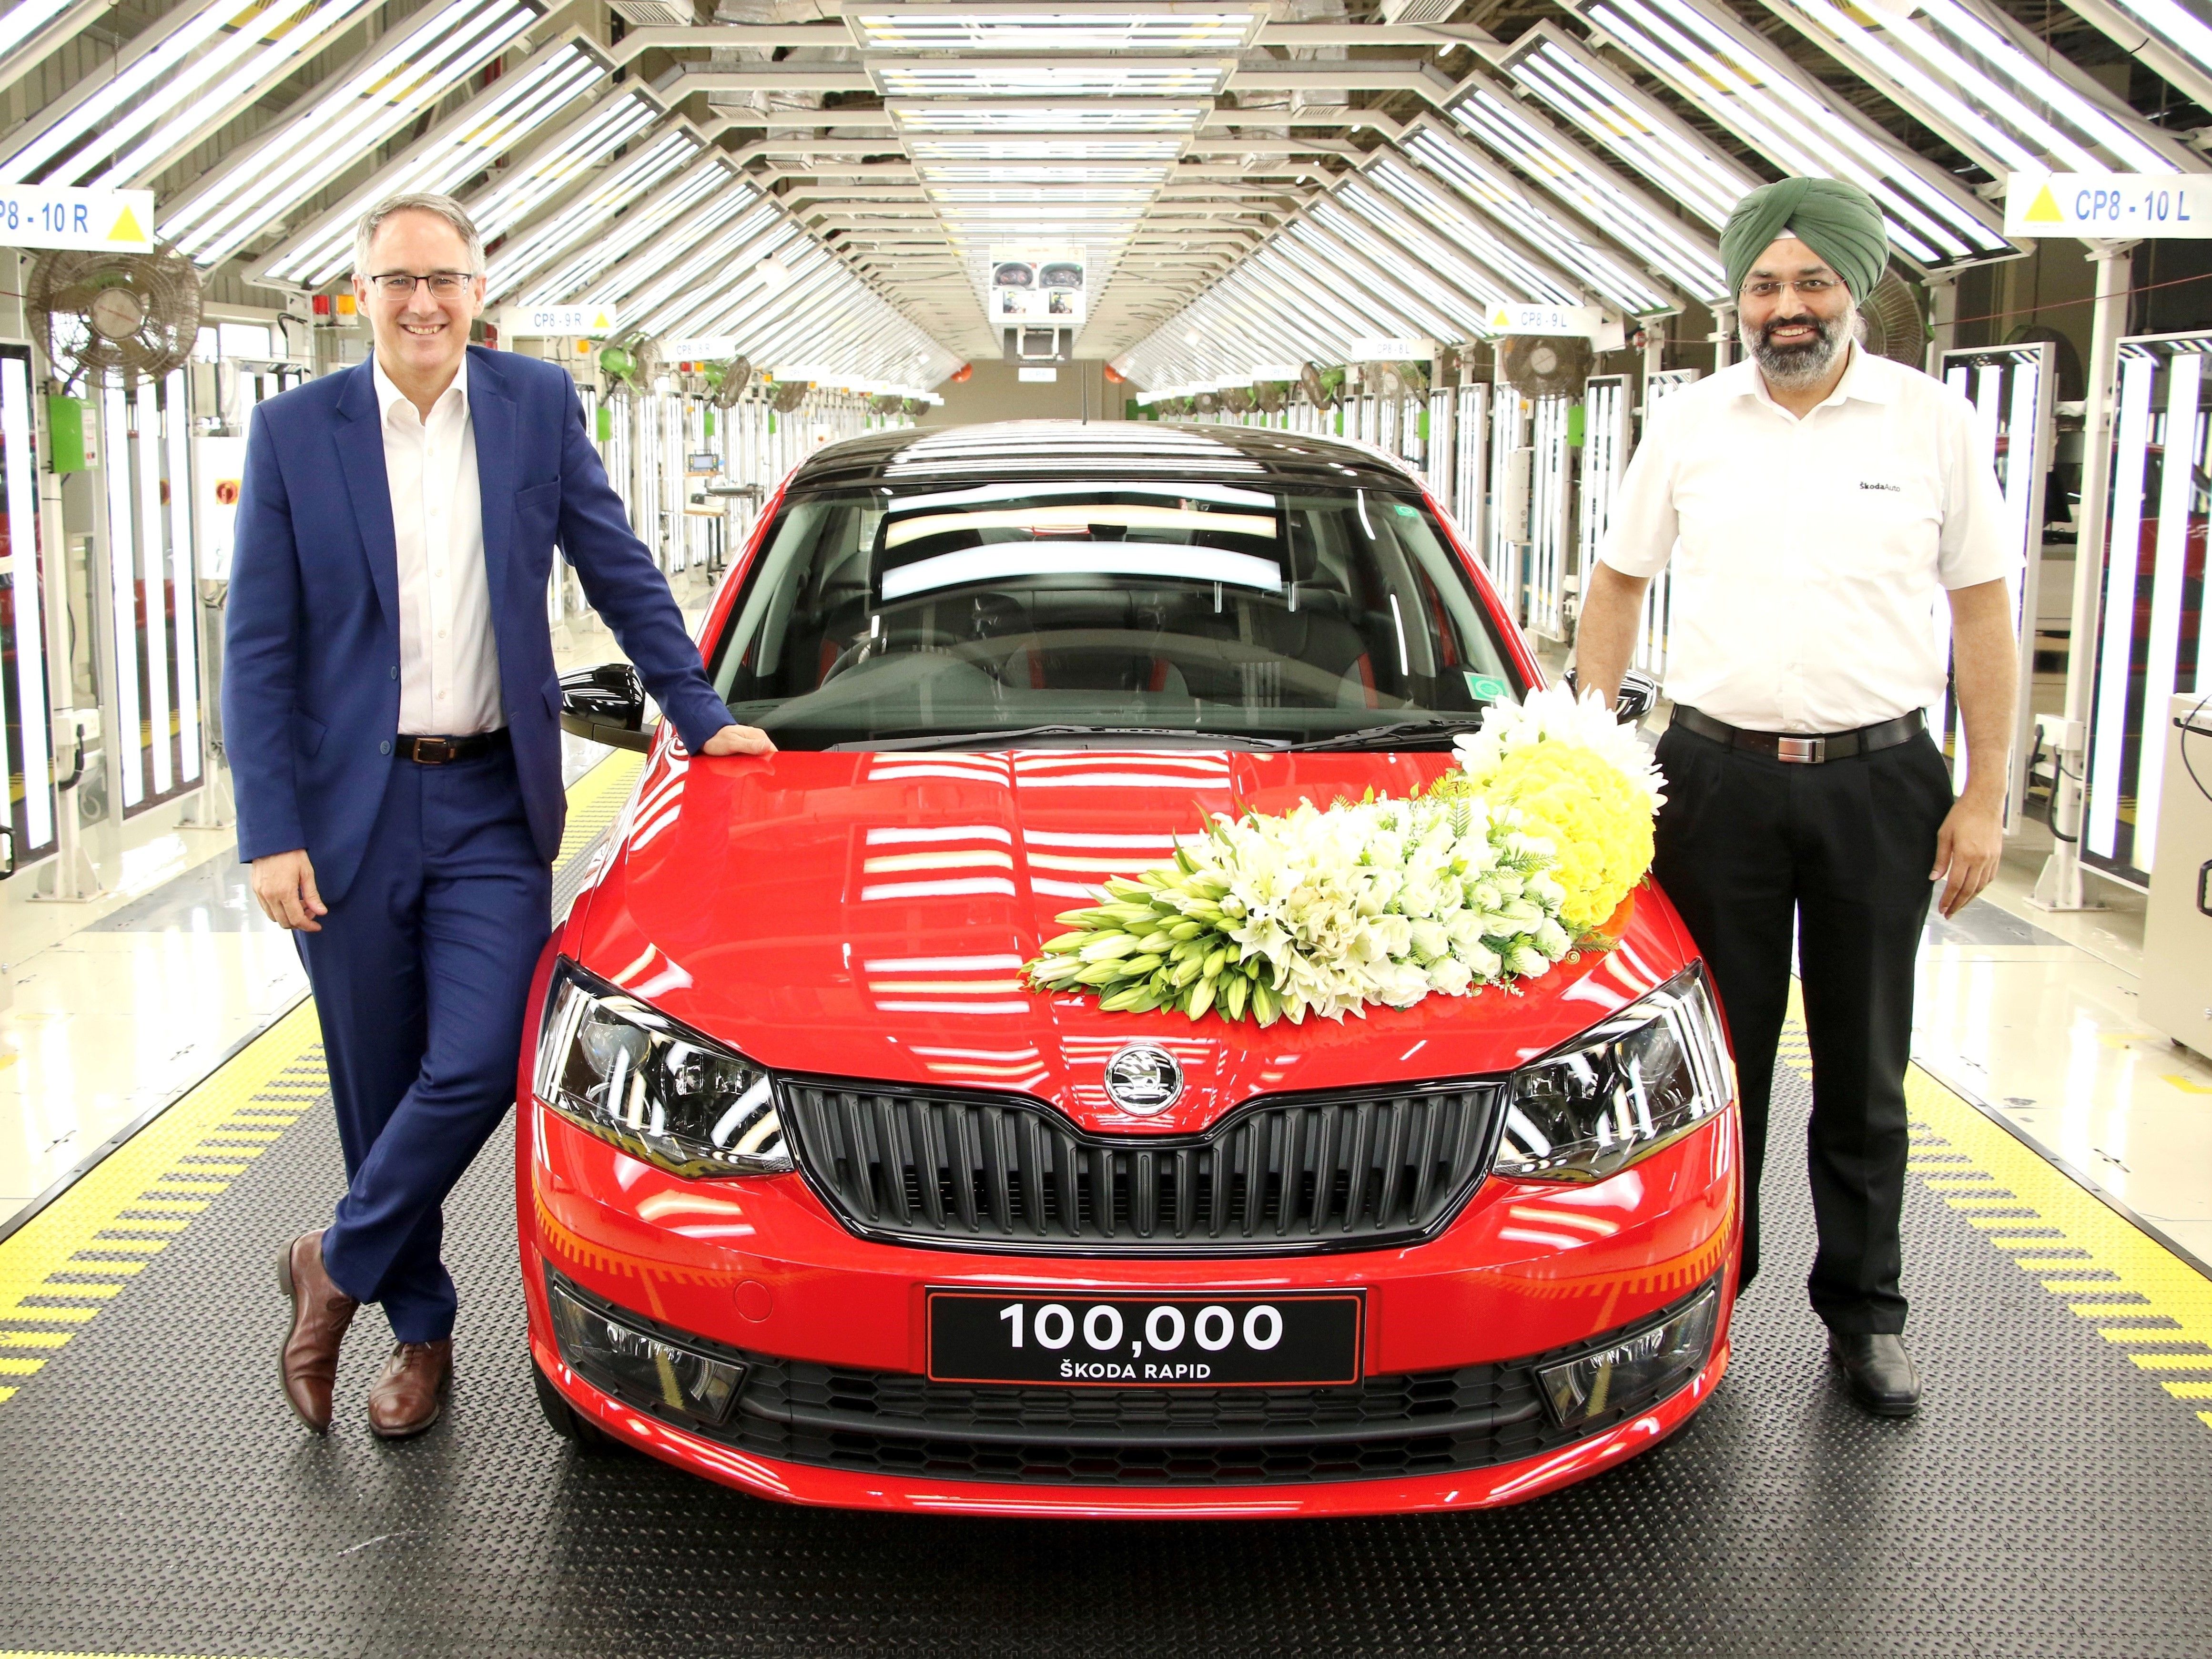 Skoda Rapid Discontinued As Production Officially Ends After 10 Years